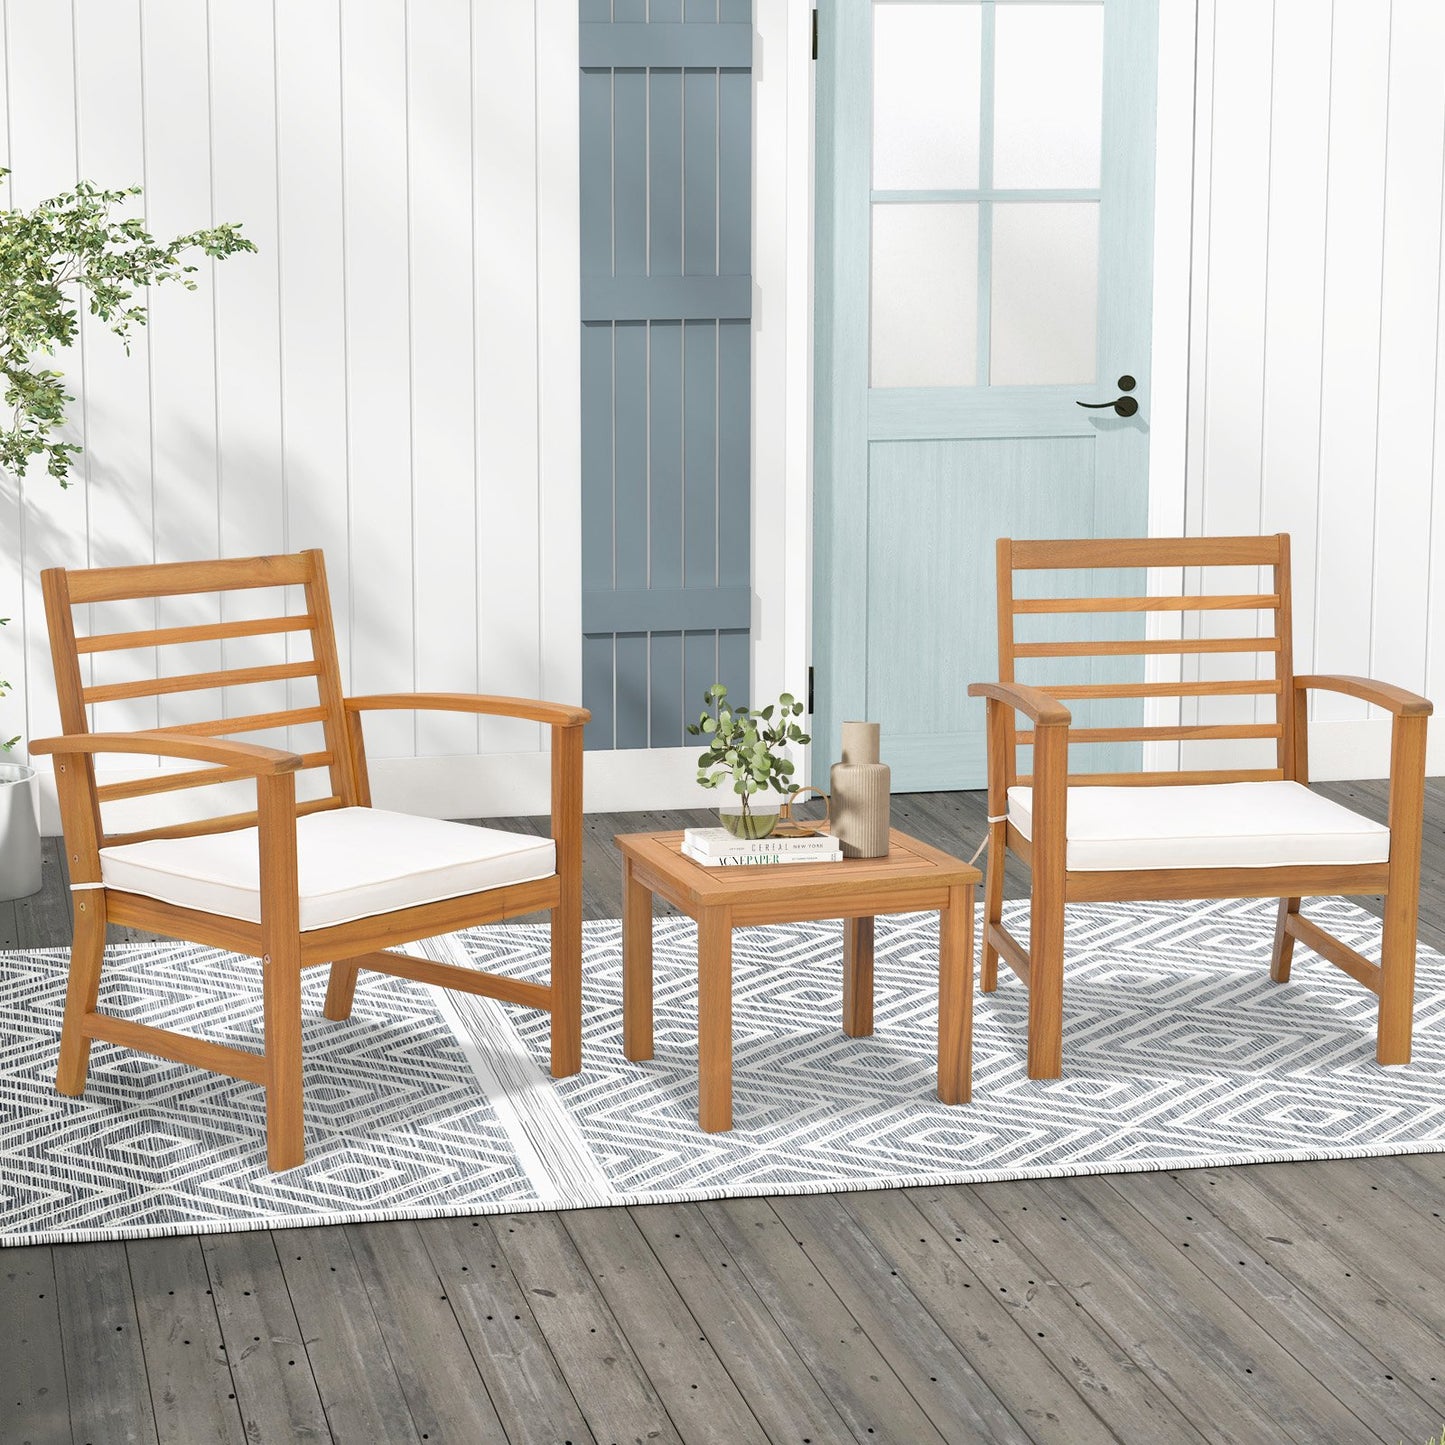 3 Pieces Outdoor Furniture Set with Soft Seat Cushions, White